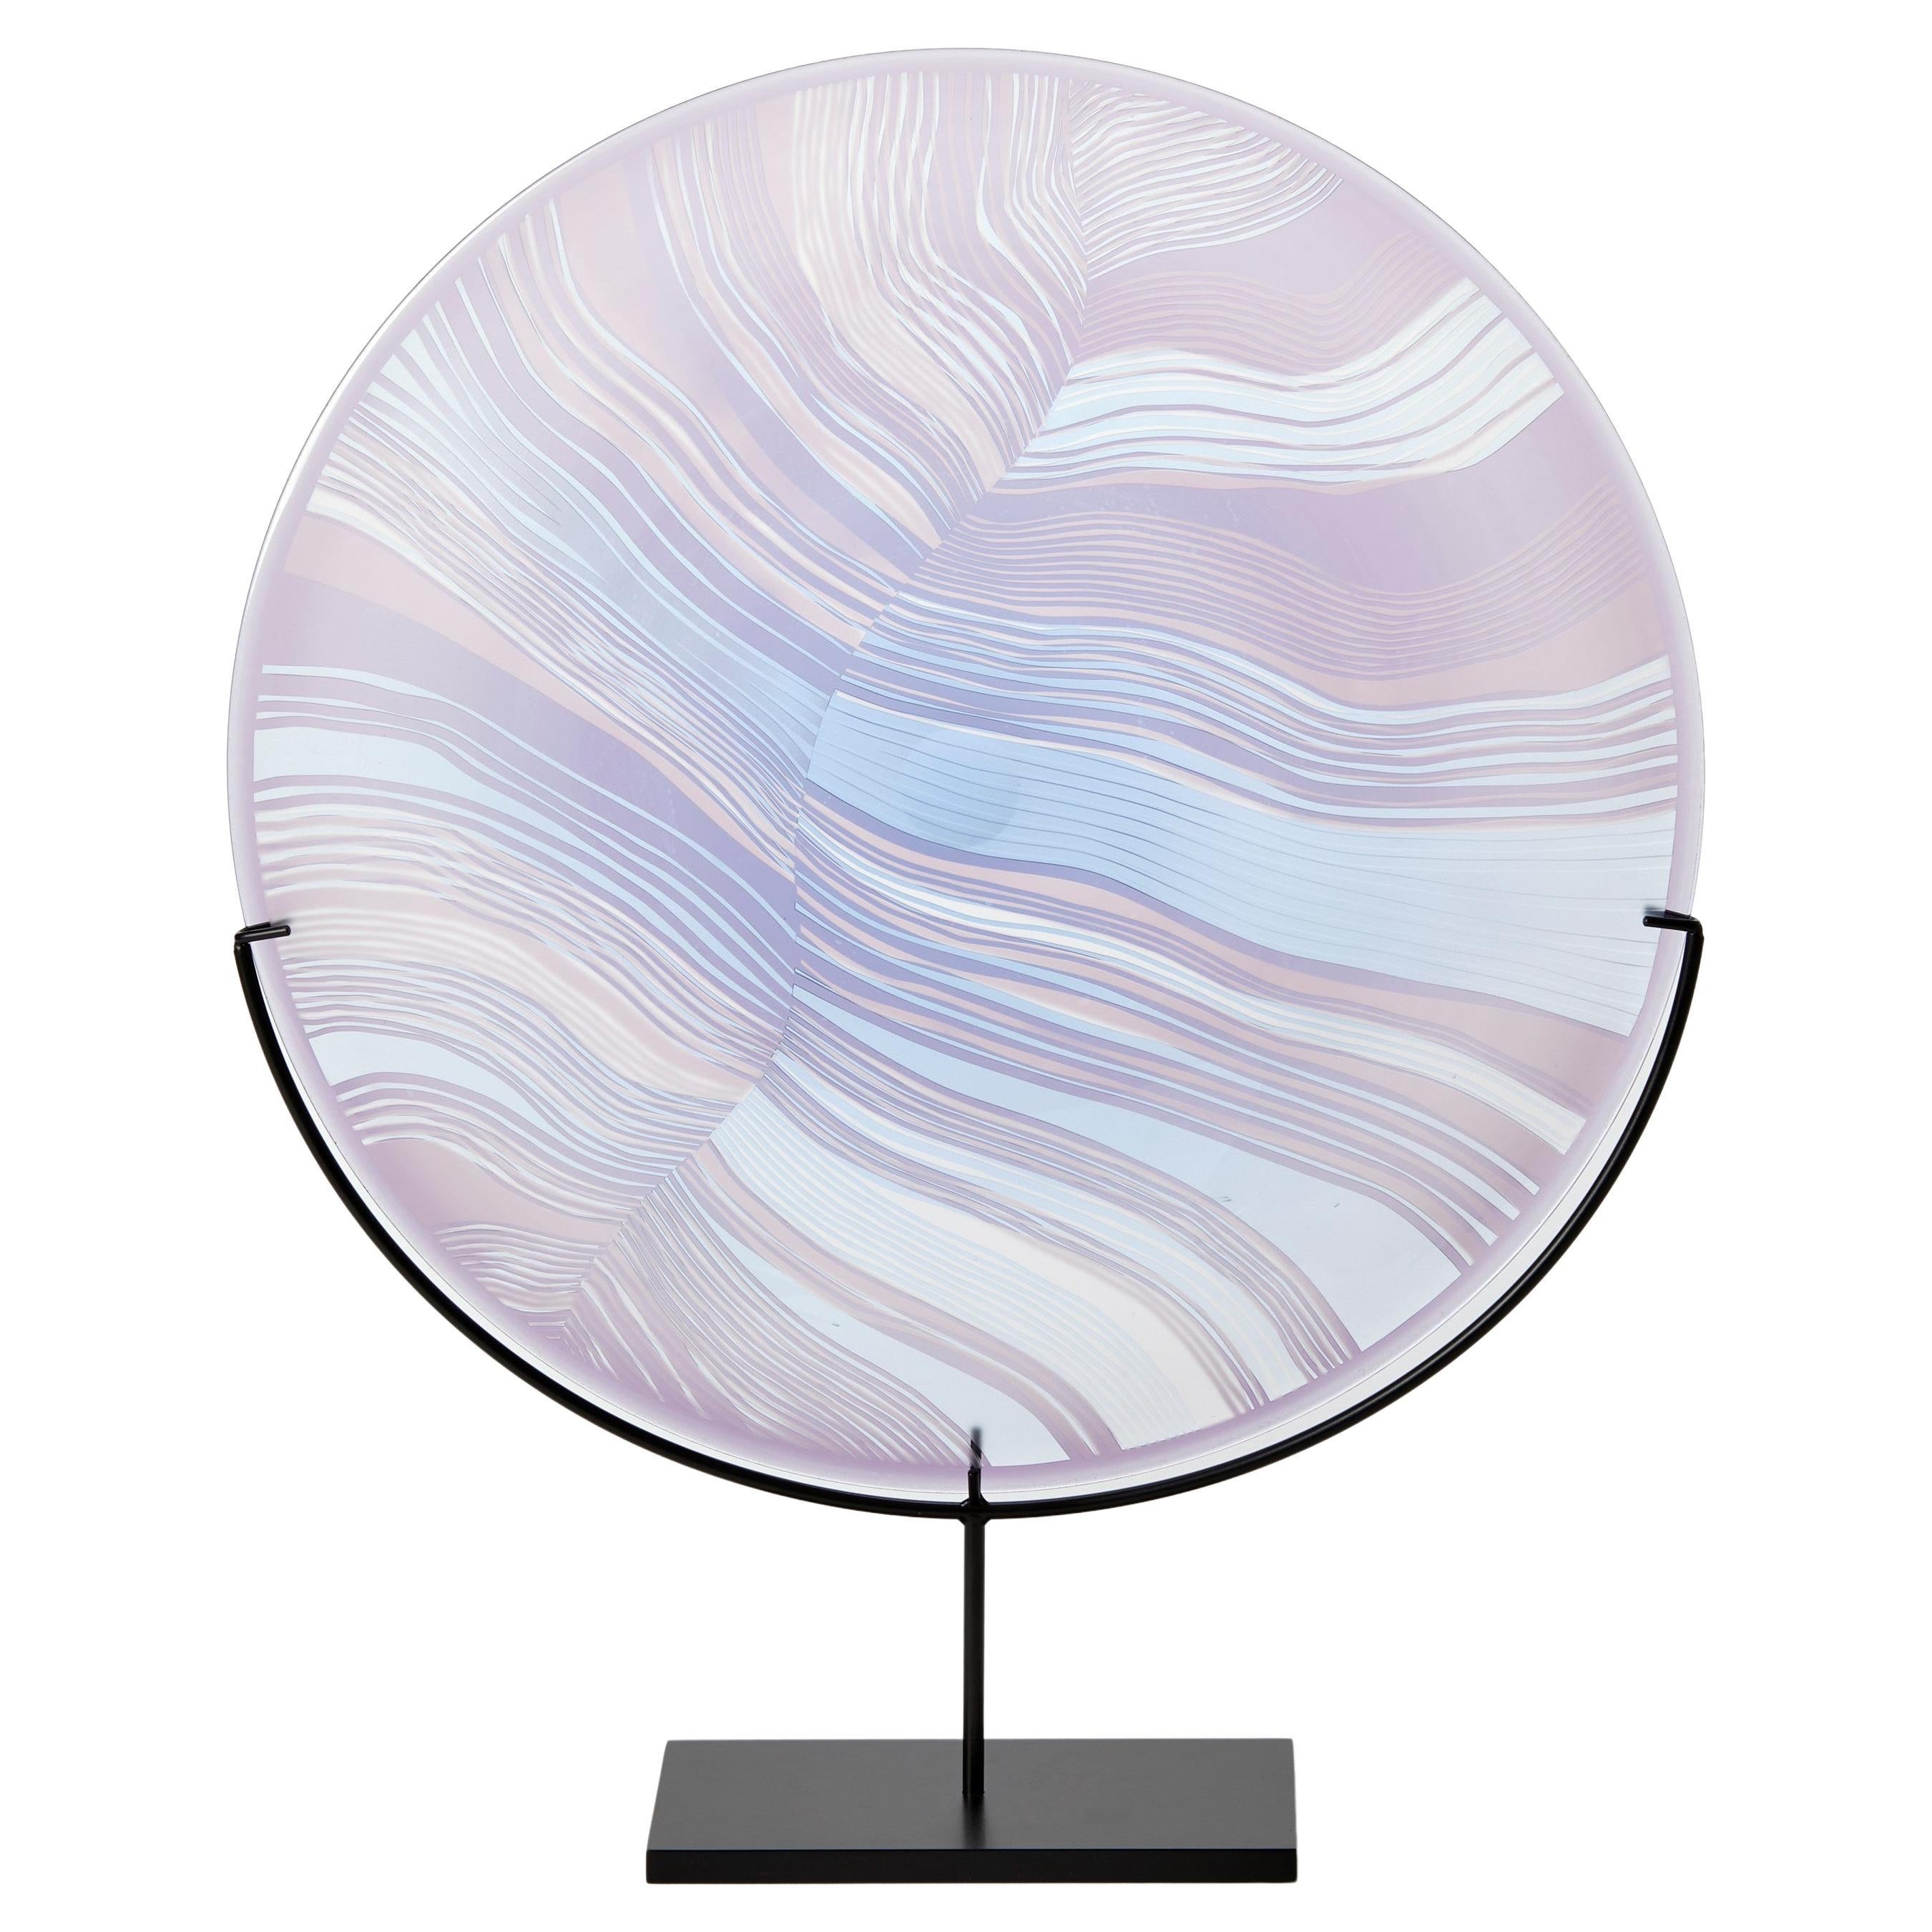 Solar Storm Sky Blue over Lilac, mounted linear cut glass artwork by Kate Jones